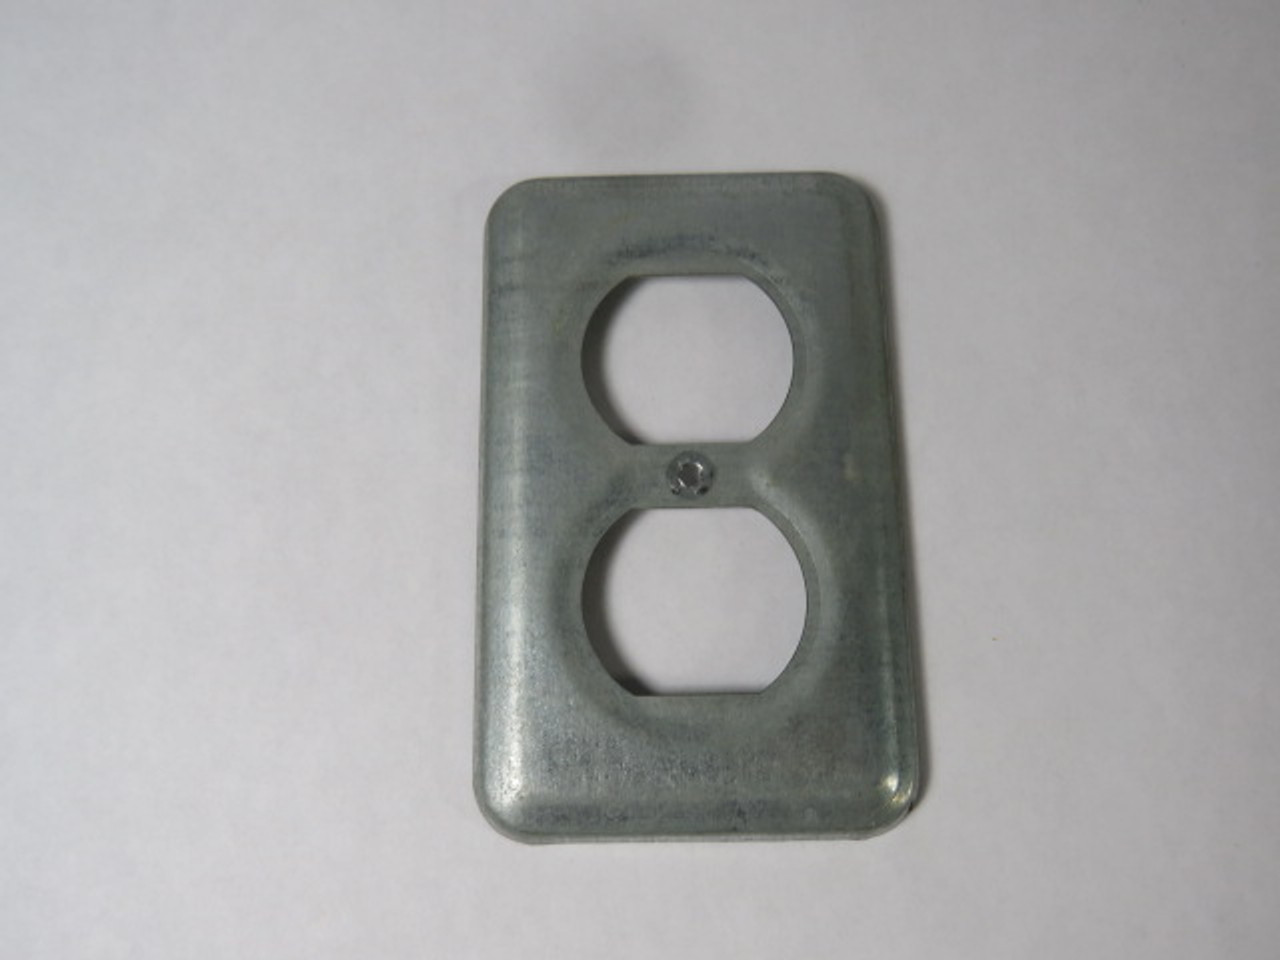 Thomas & Betts G1038C Duplex Cover Plate USED